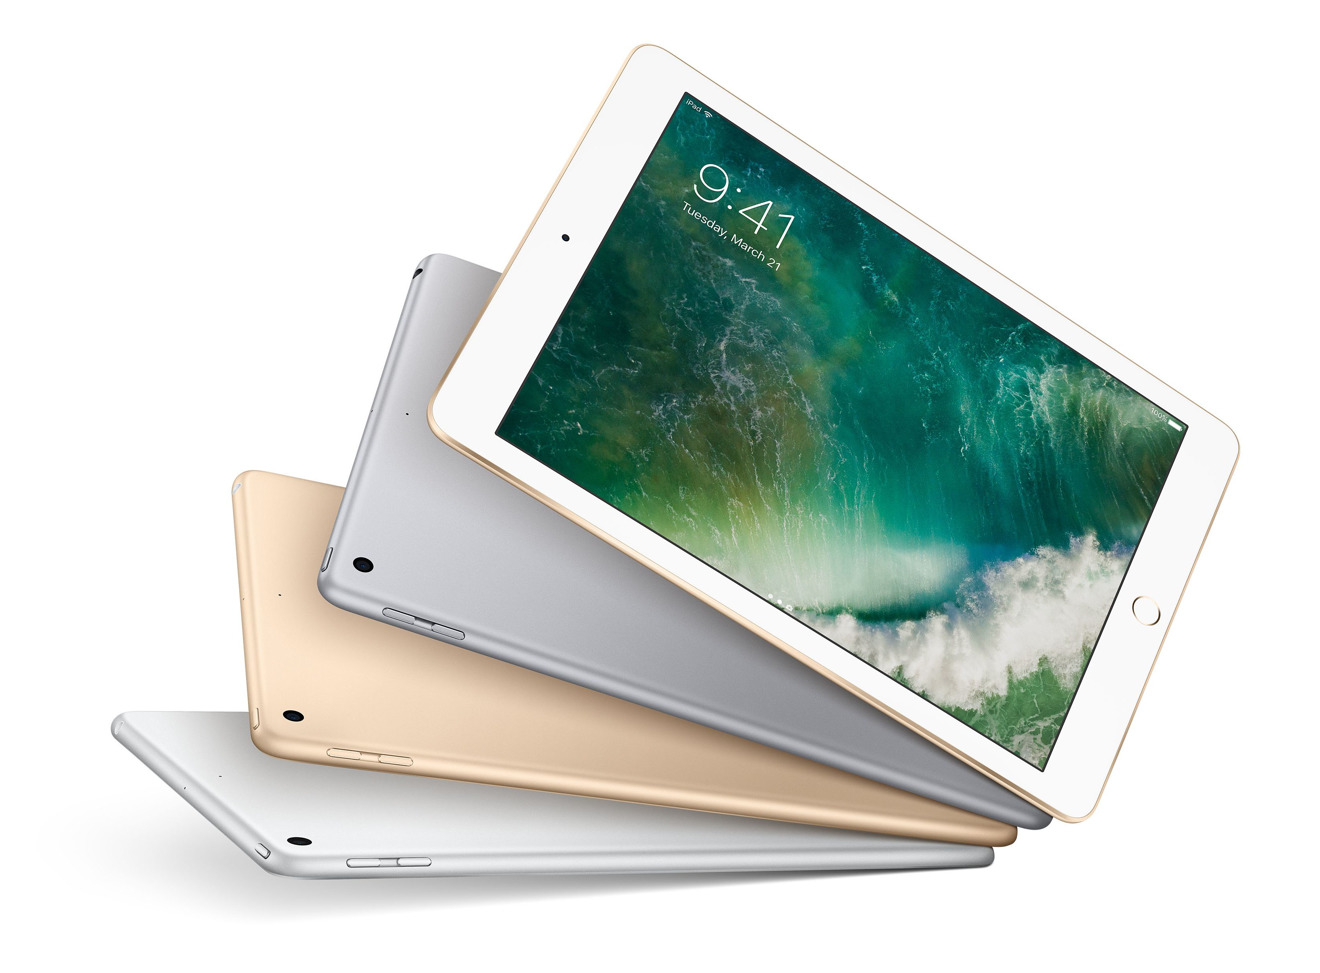 Apple iPad 2017 in Silver Space Gray and Gold